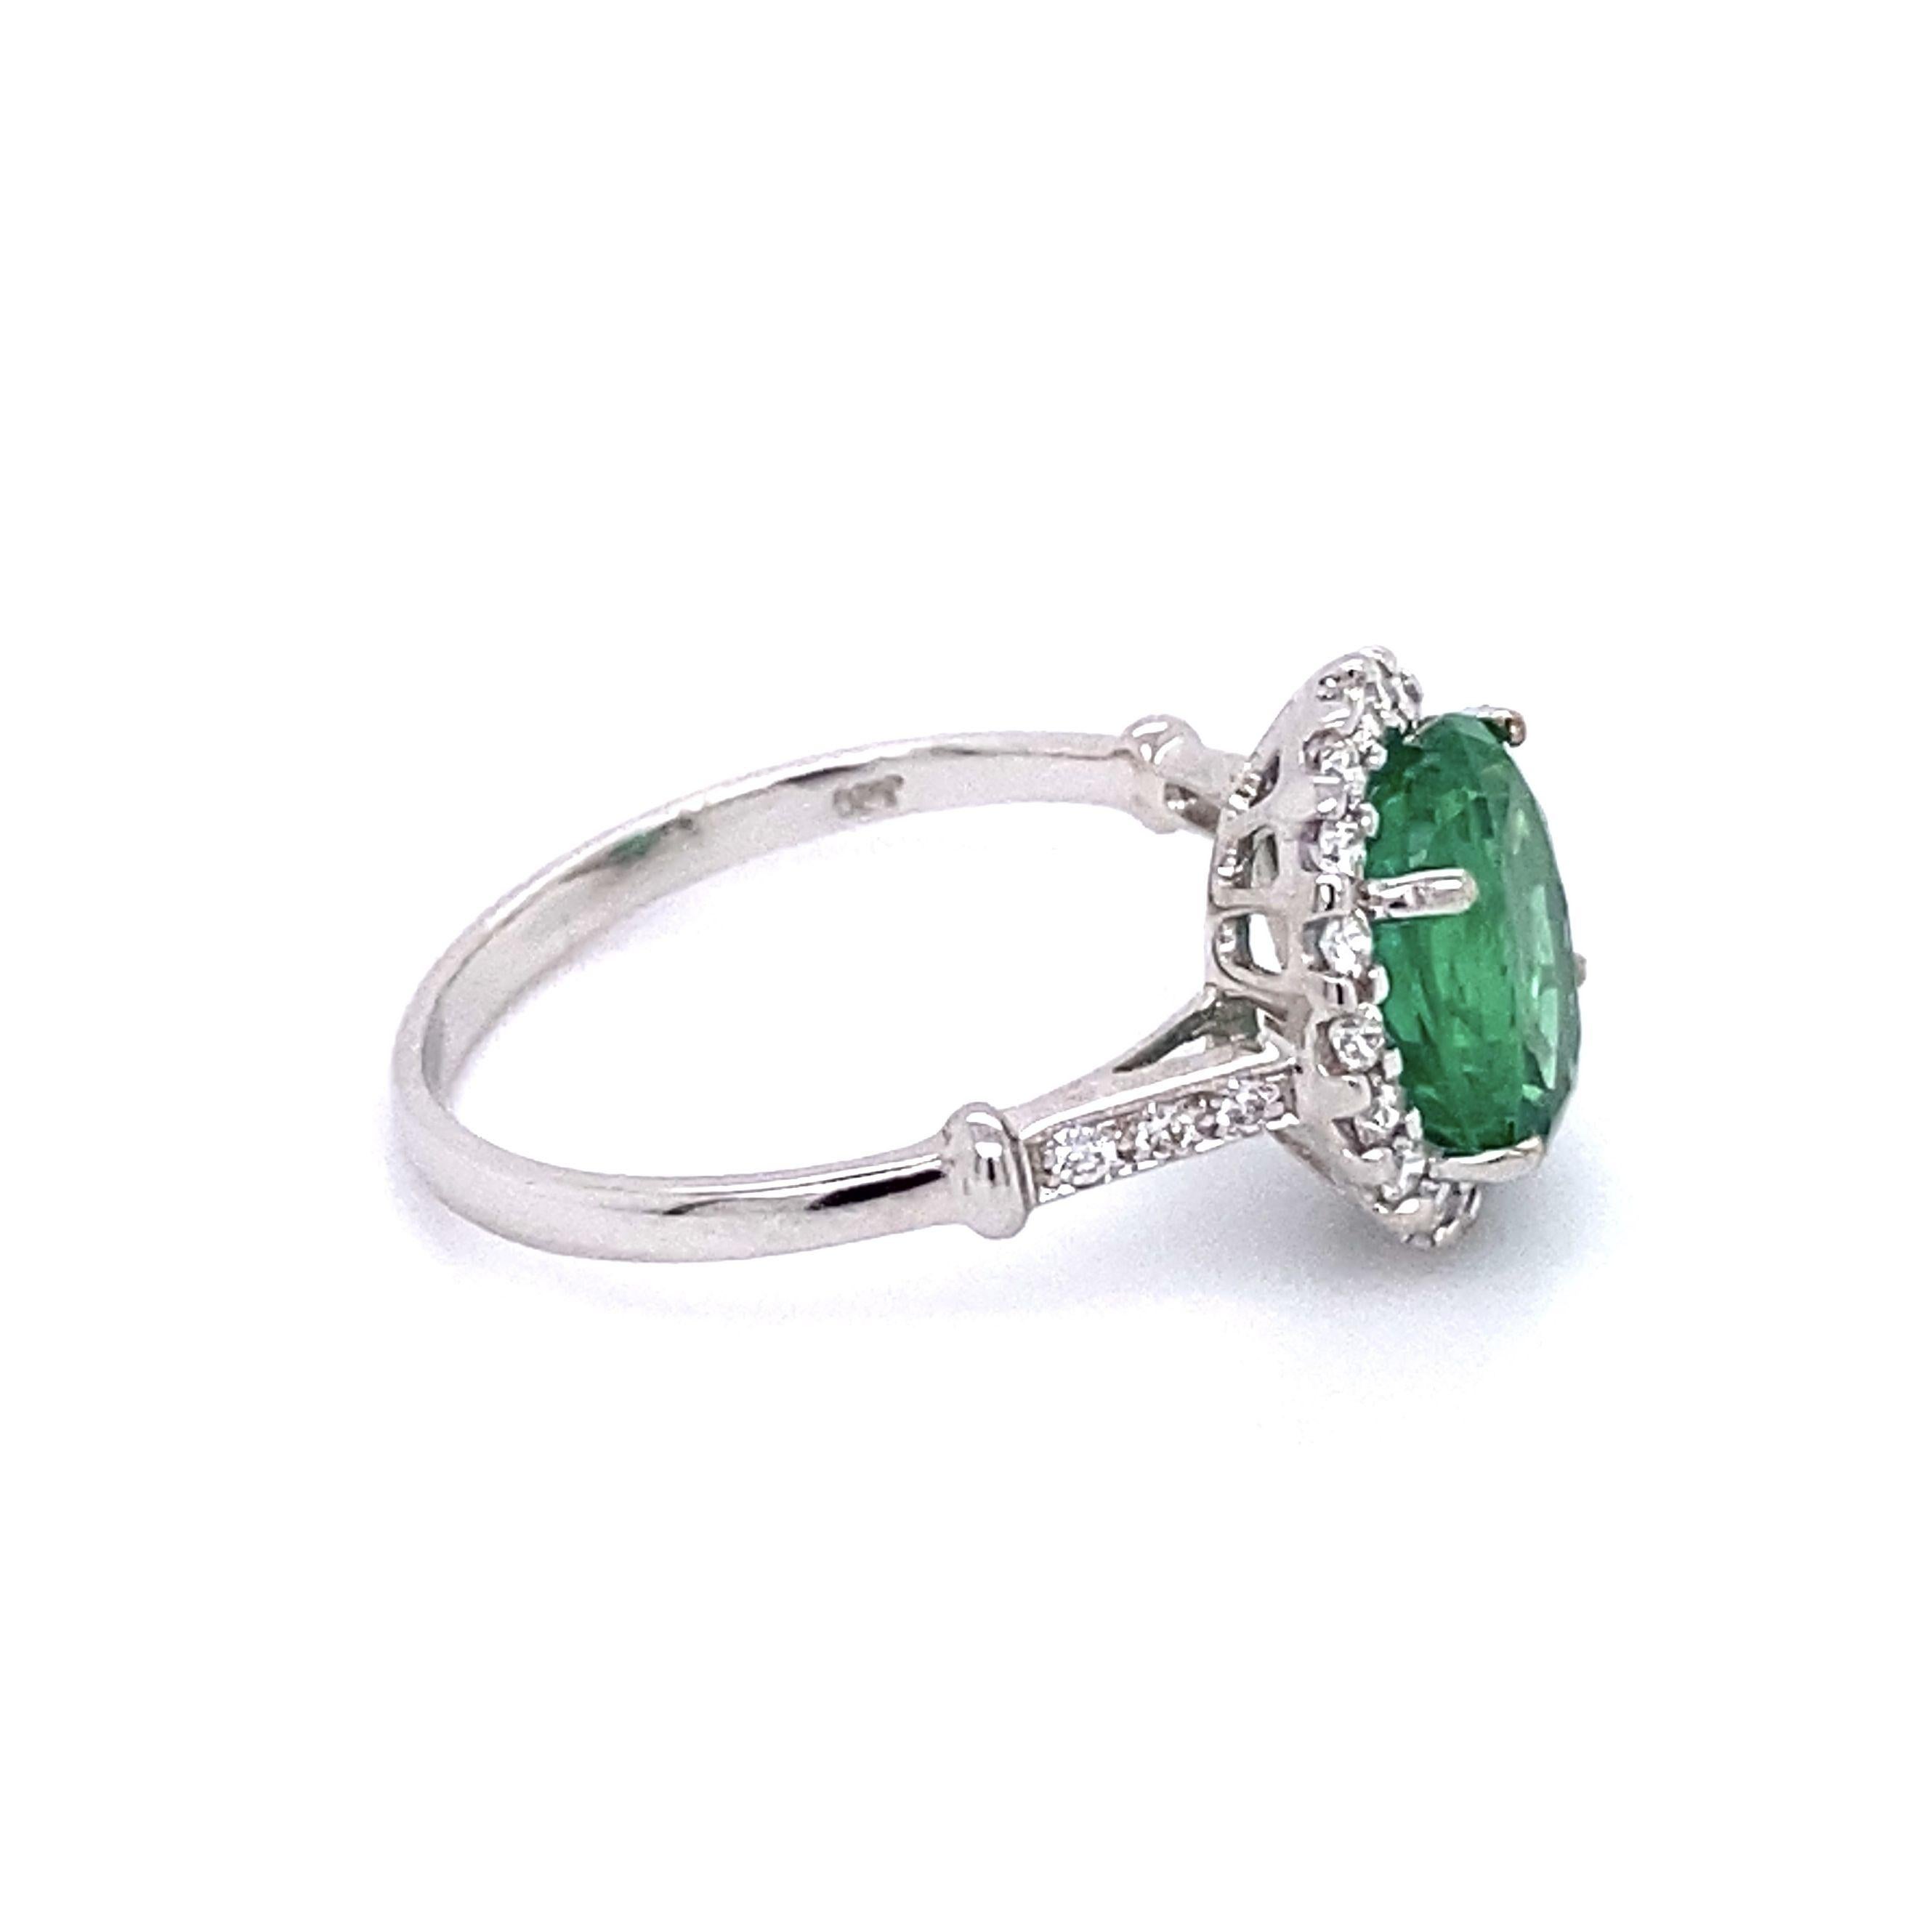 Simply Beautiful! Finely detailed Gold Cocktail Ring, center securely nestled with an Oval Emerald GIA, weighing approx. 2.25 Carats surrounded by Diamonds; approx. total weight of Diamonds 0.33 Carats. Approx. dimensions: 0.95” l x 0.75” w x 0.48”